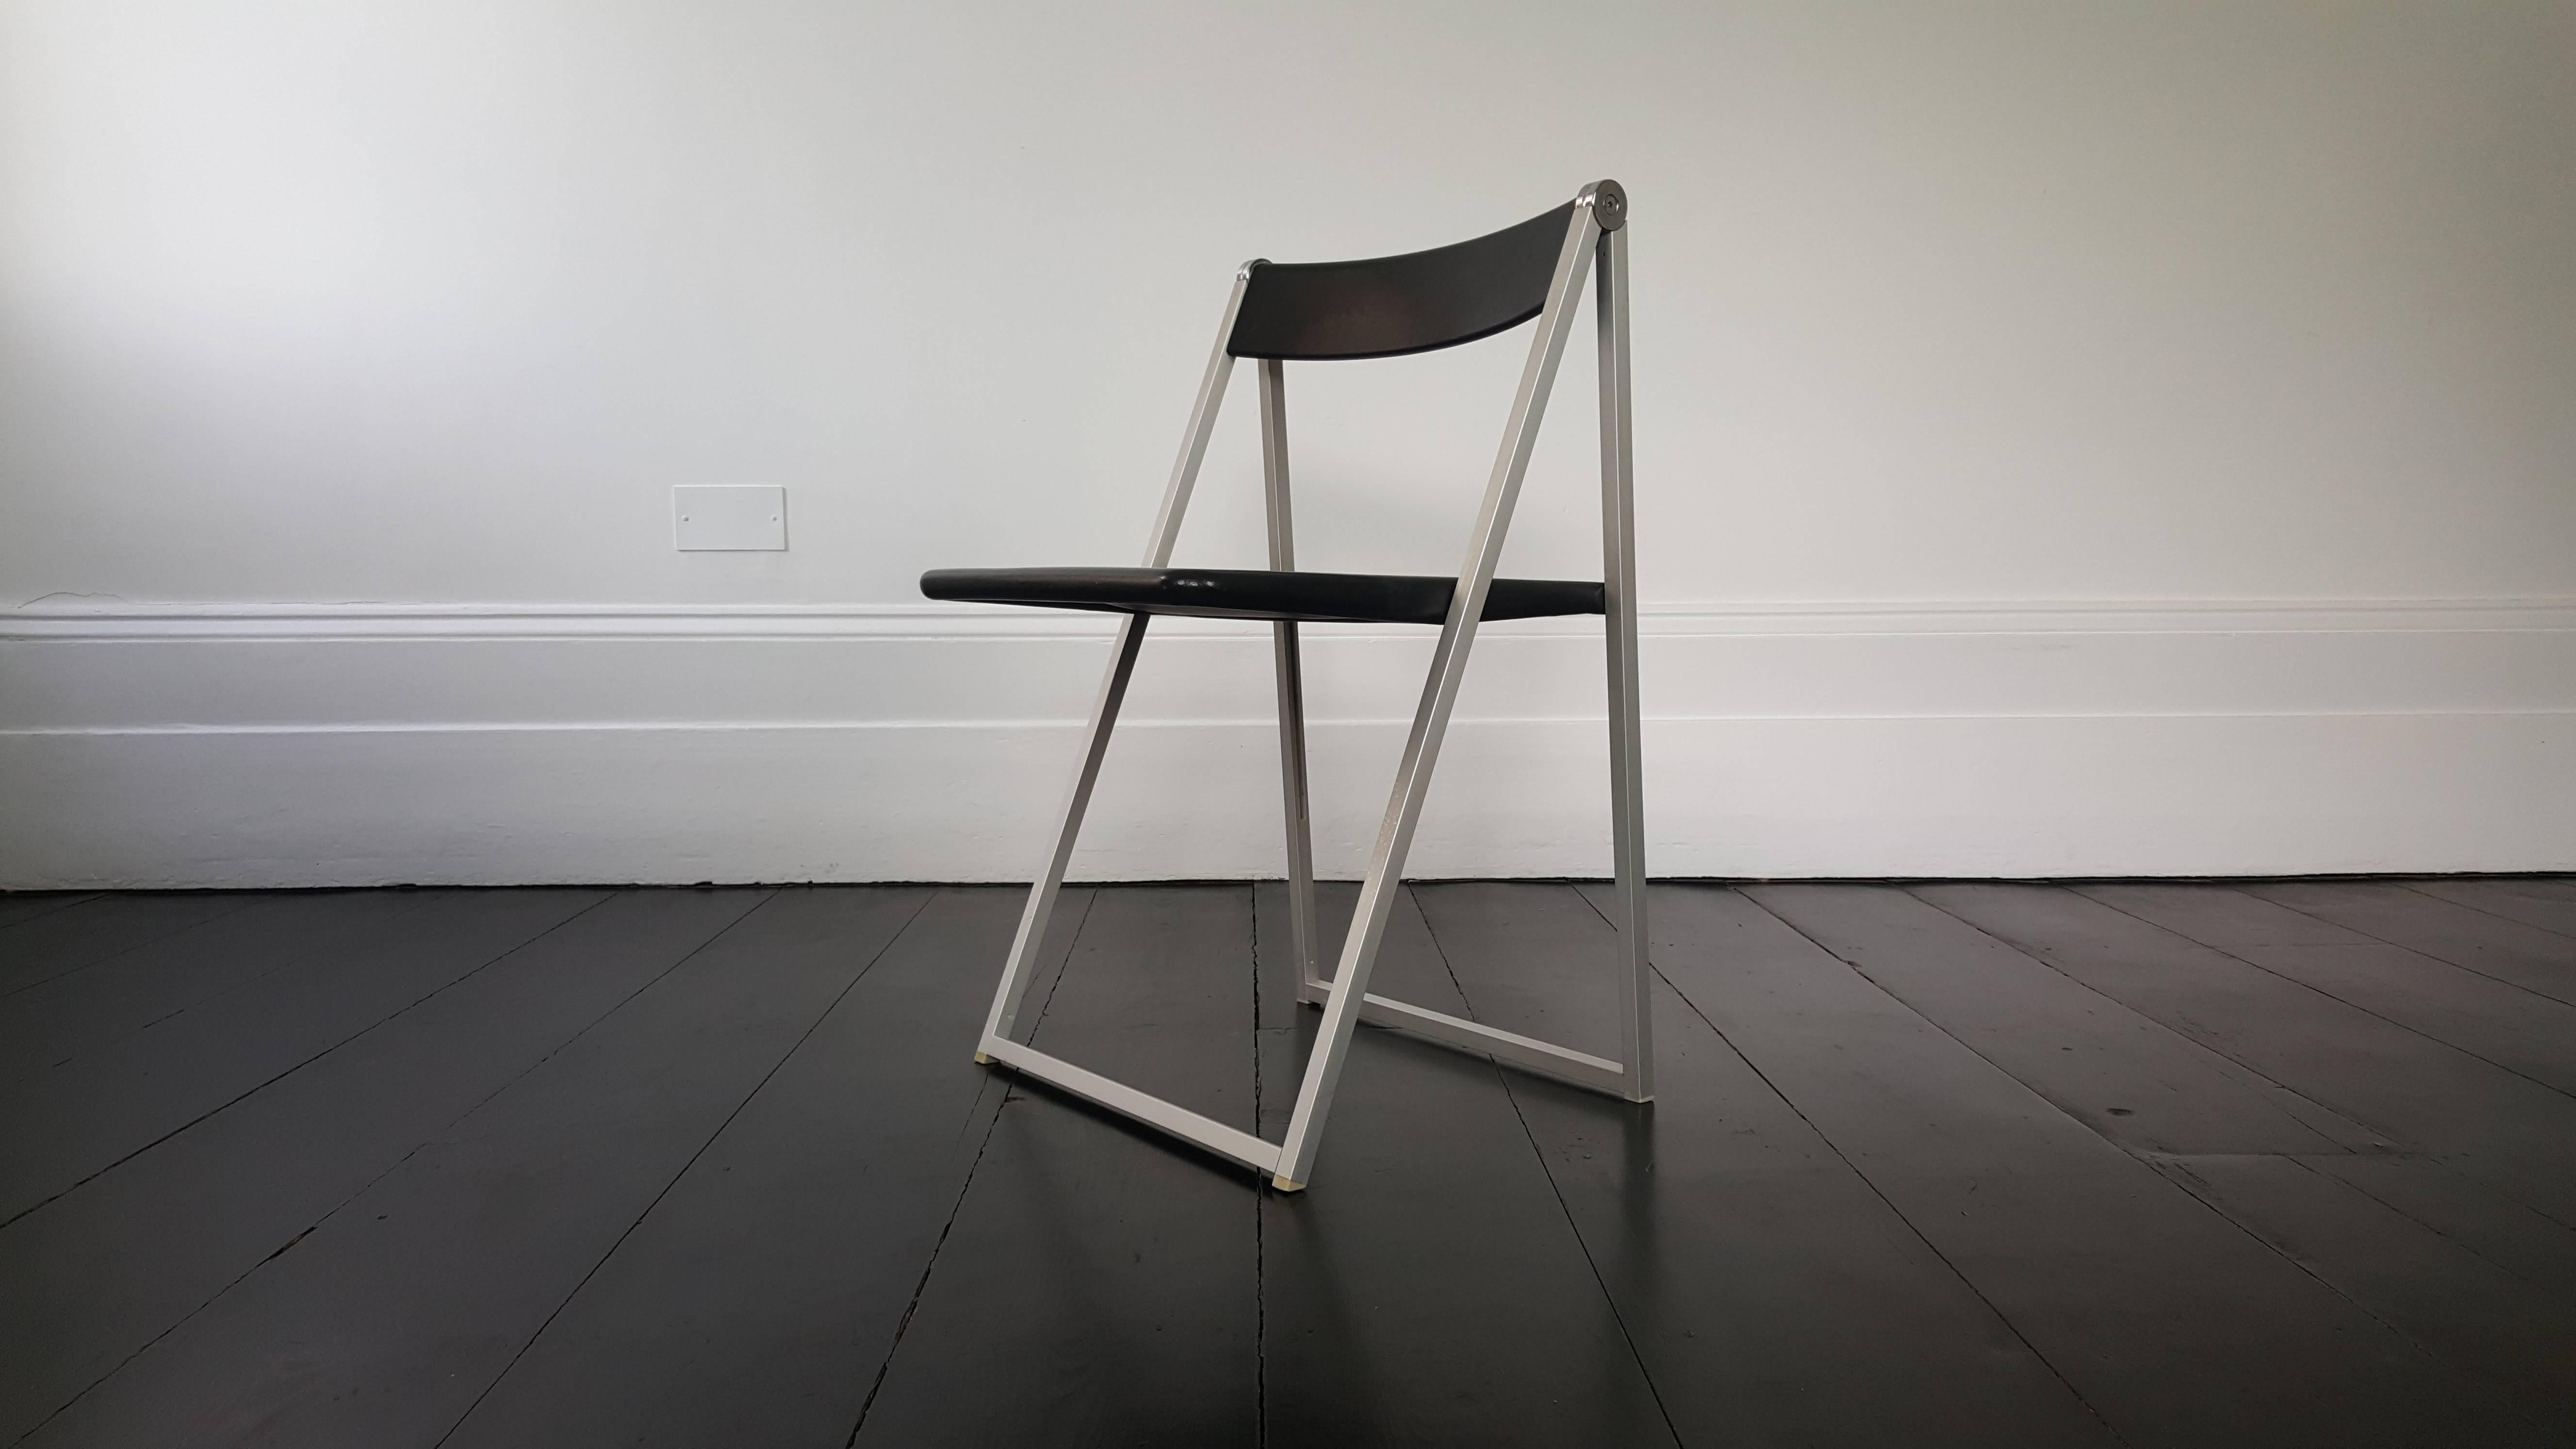 Folding Chair, Designed in 1971 by Team Form AG, Manufactured by Interlübke im Zustand „Gut“ in London Road, Baldock, Hertfordshire